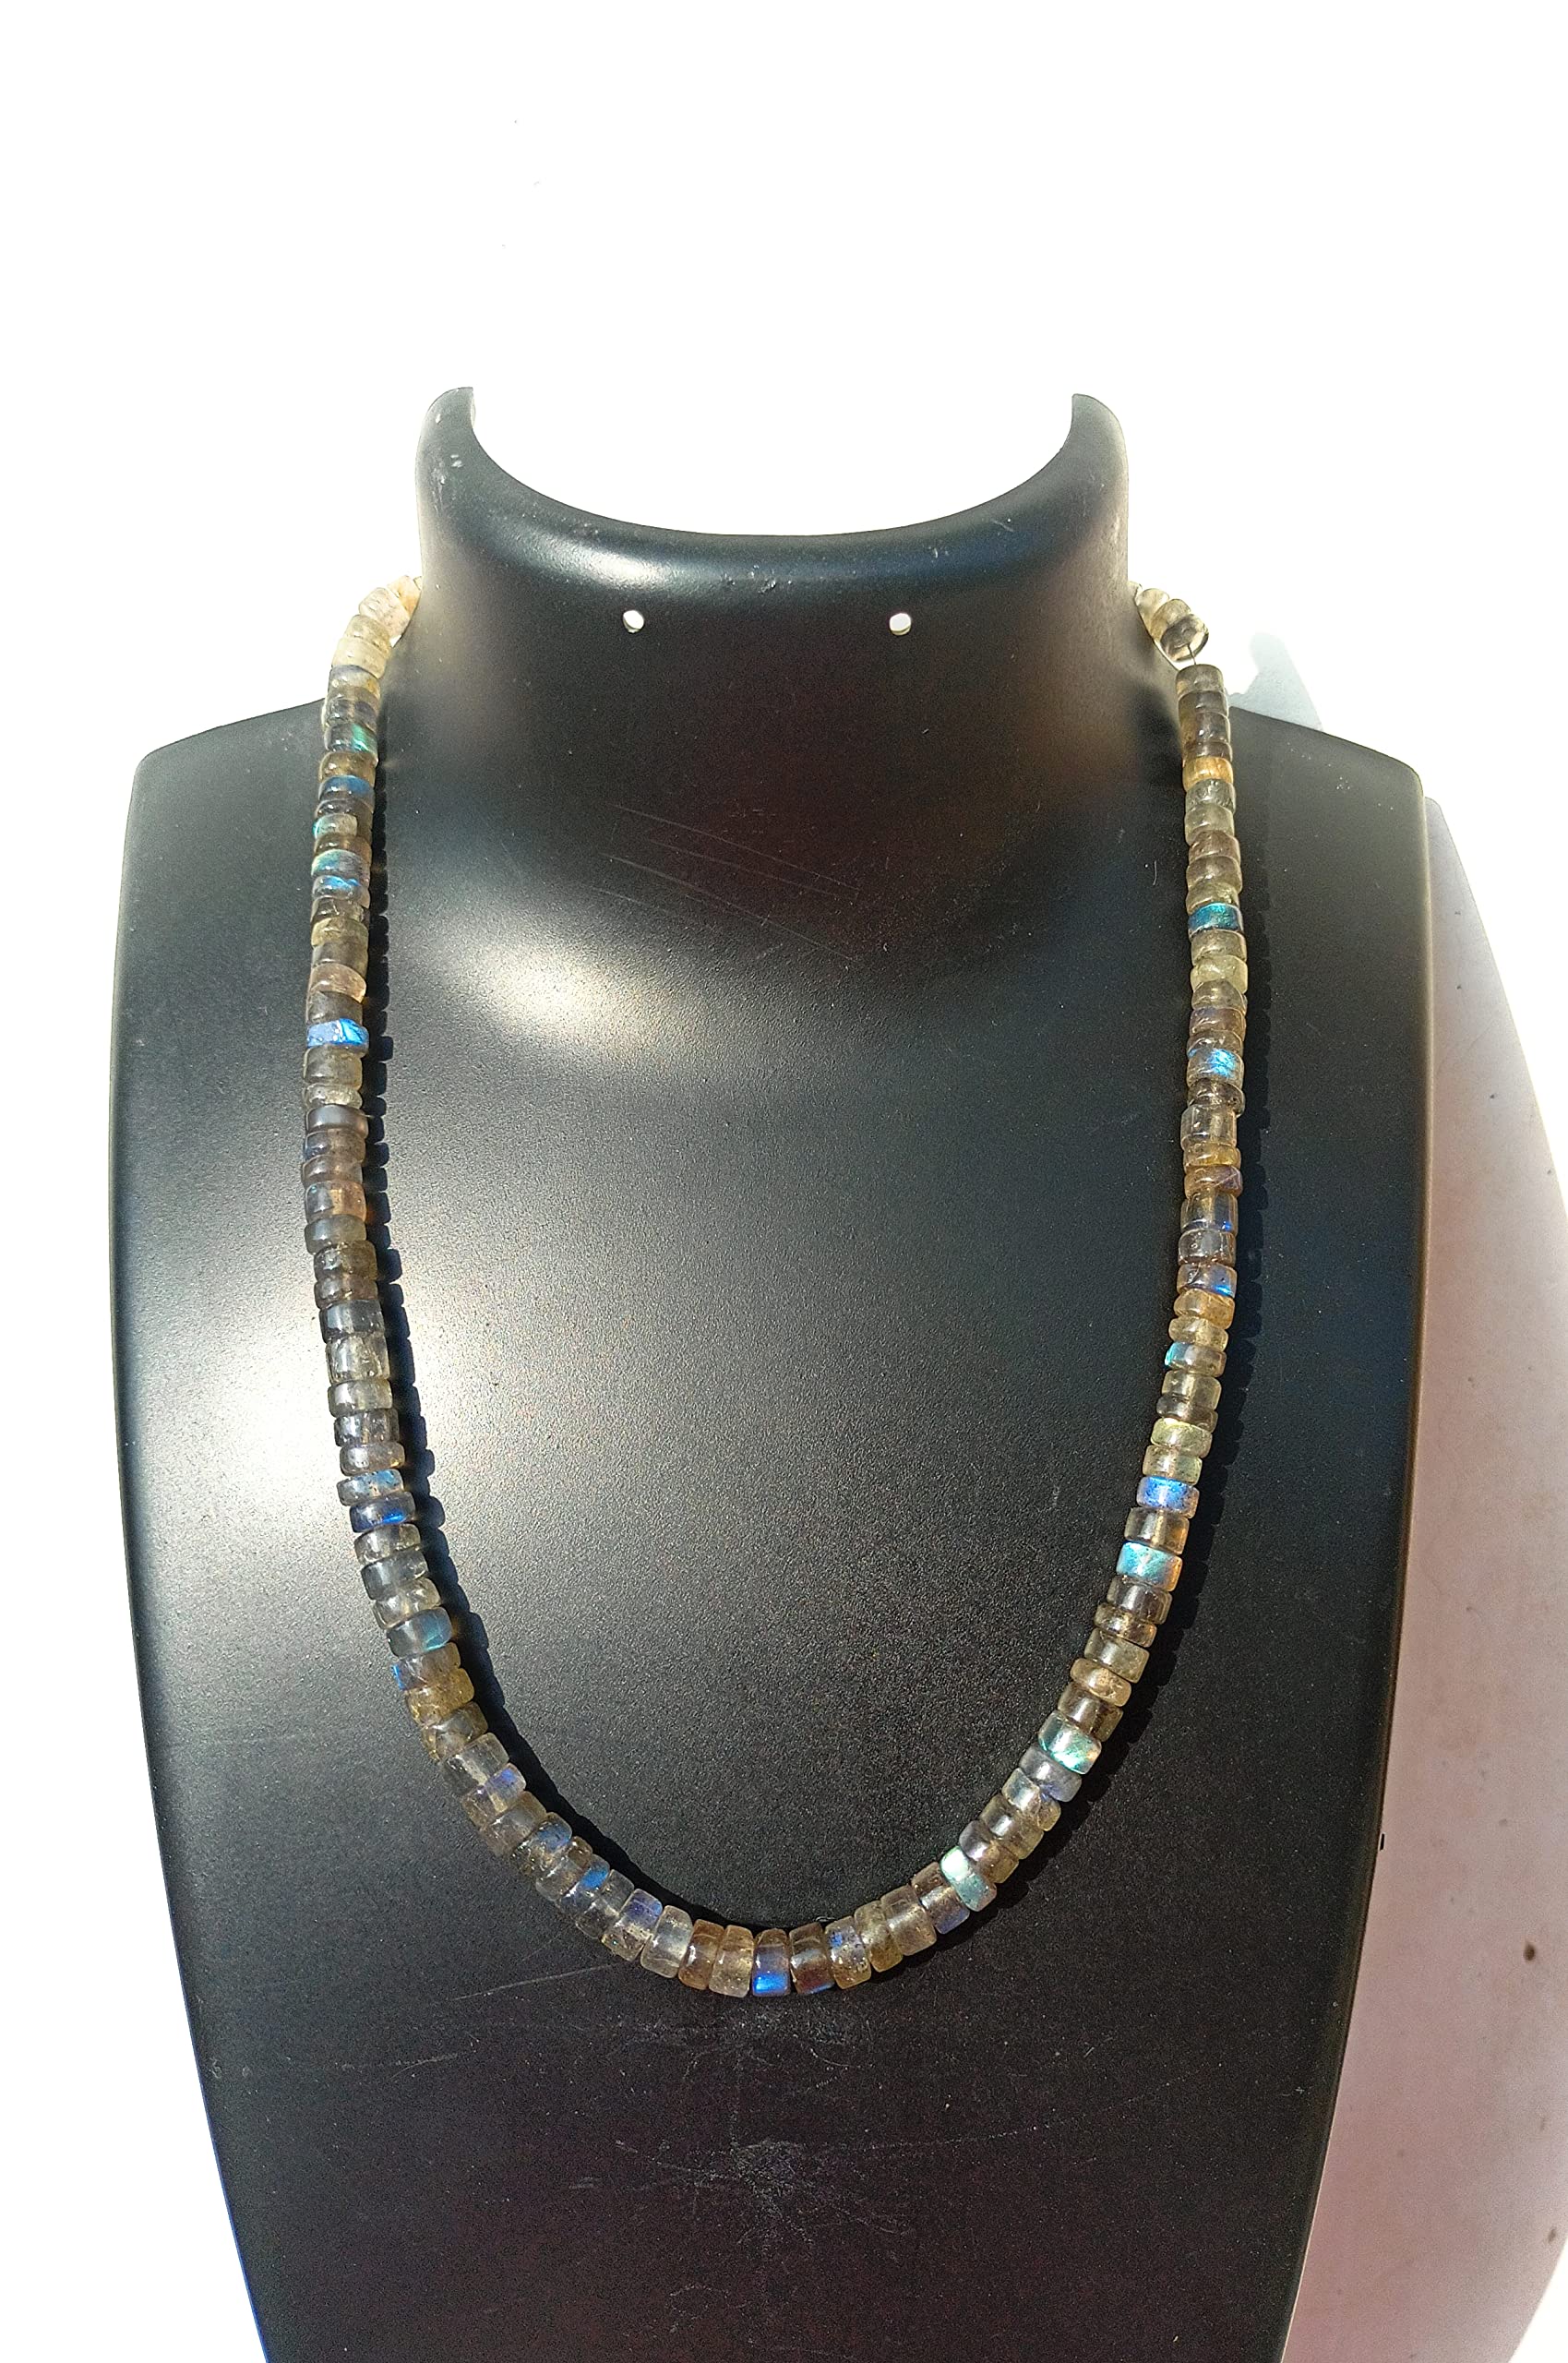 Natural Labradorite Necklace 18 Inch With Sterling Silver, Heishi Tyre Beads, Smooth Cut, Labradorite Necklace, Silver Jewelry, Grey